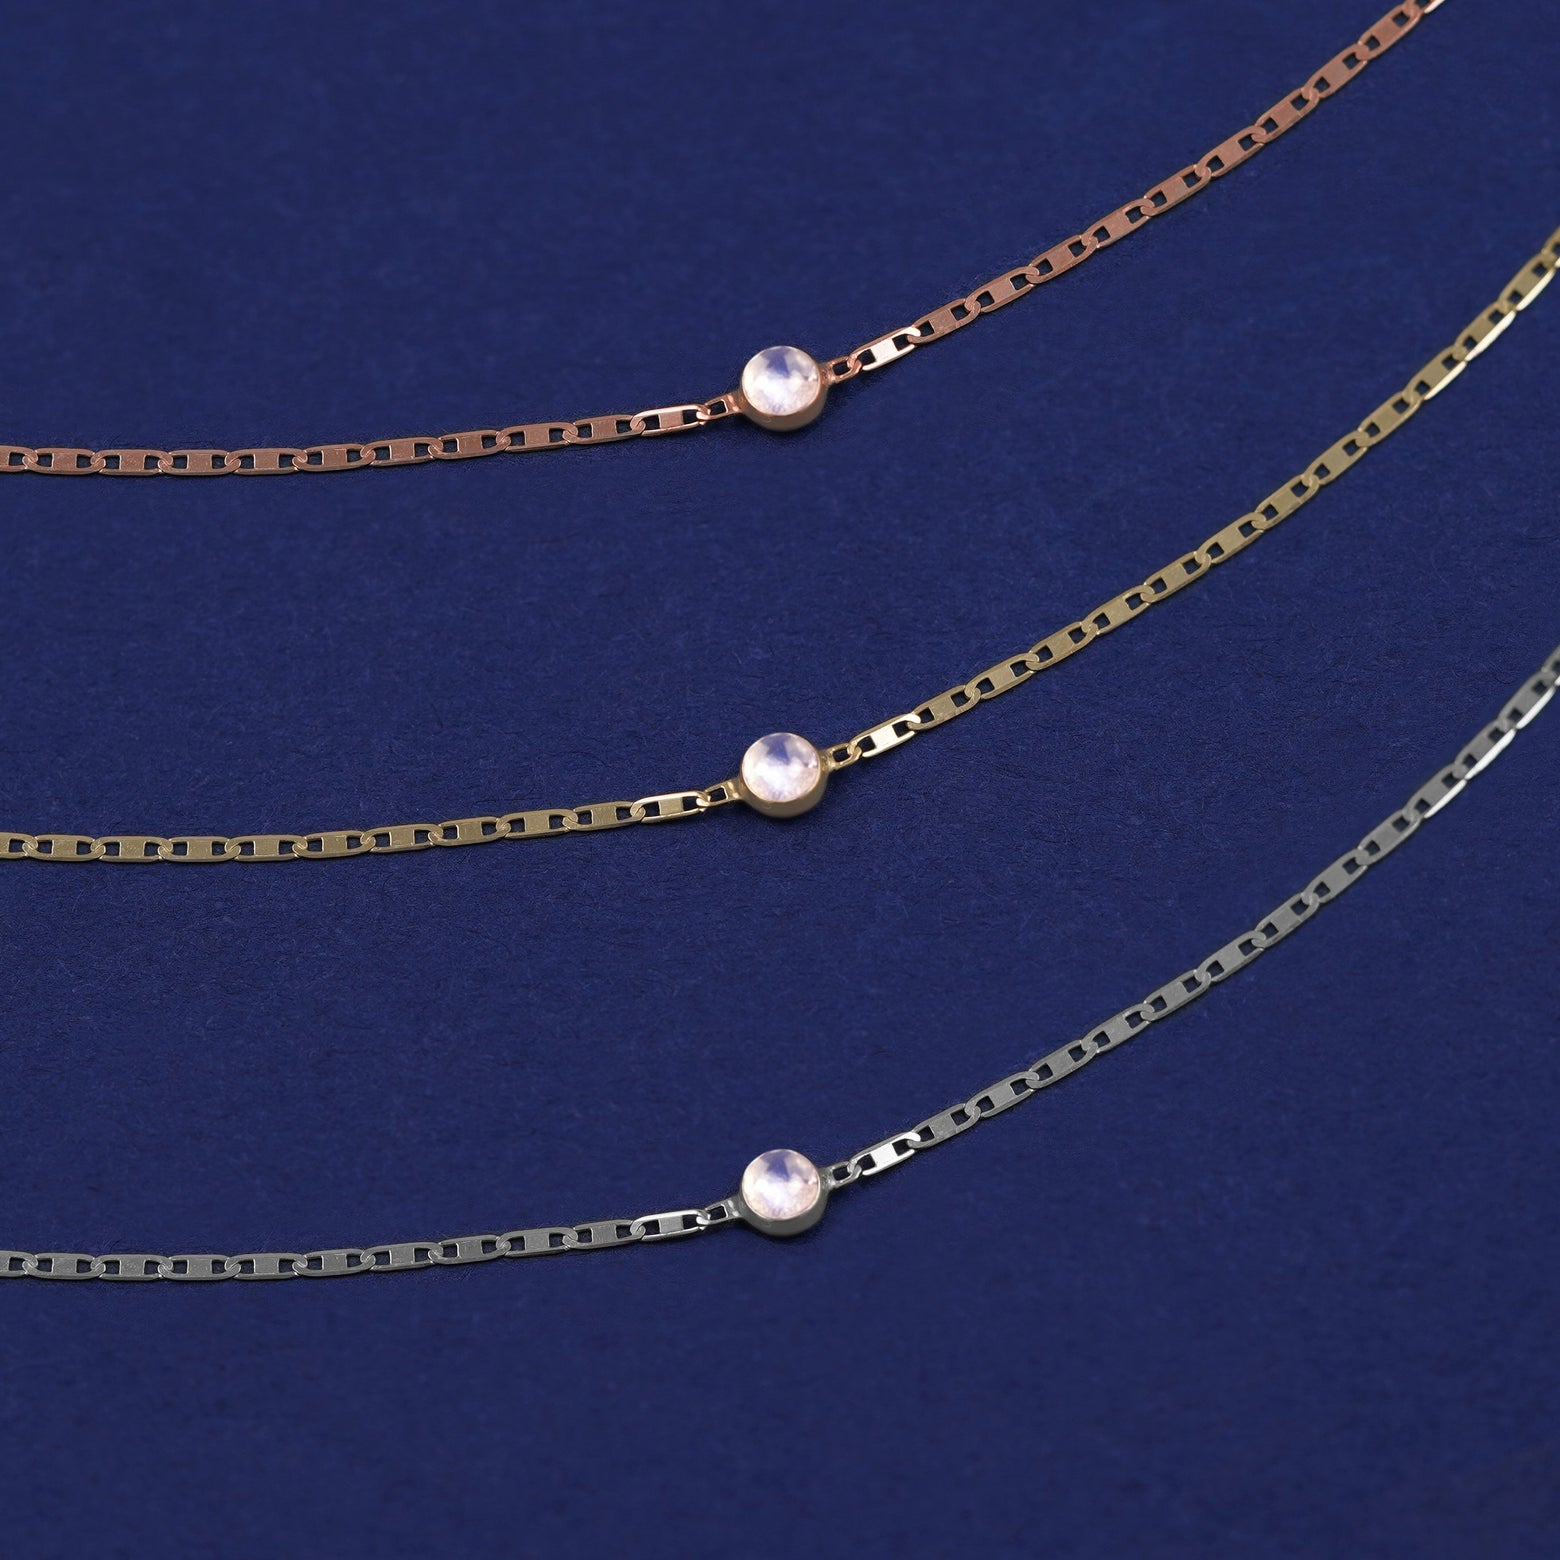 Three Moonstone Bracelets shown in options of rose, yellow, and white gold